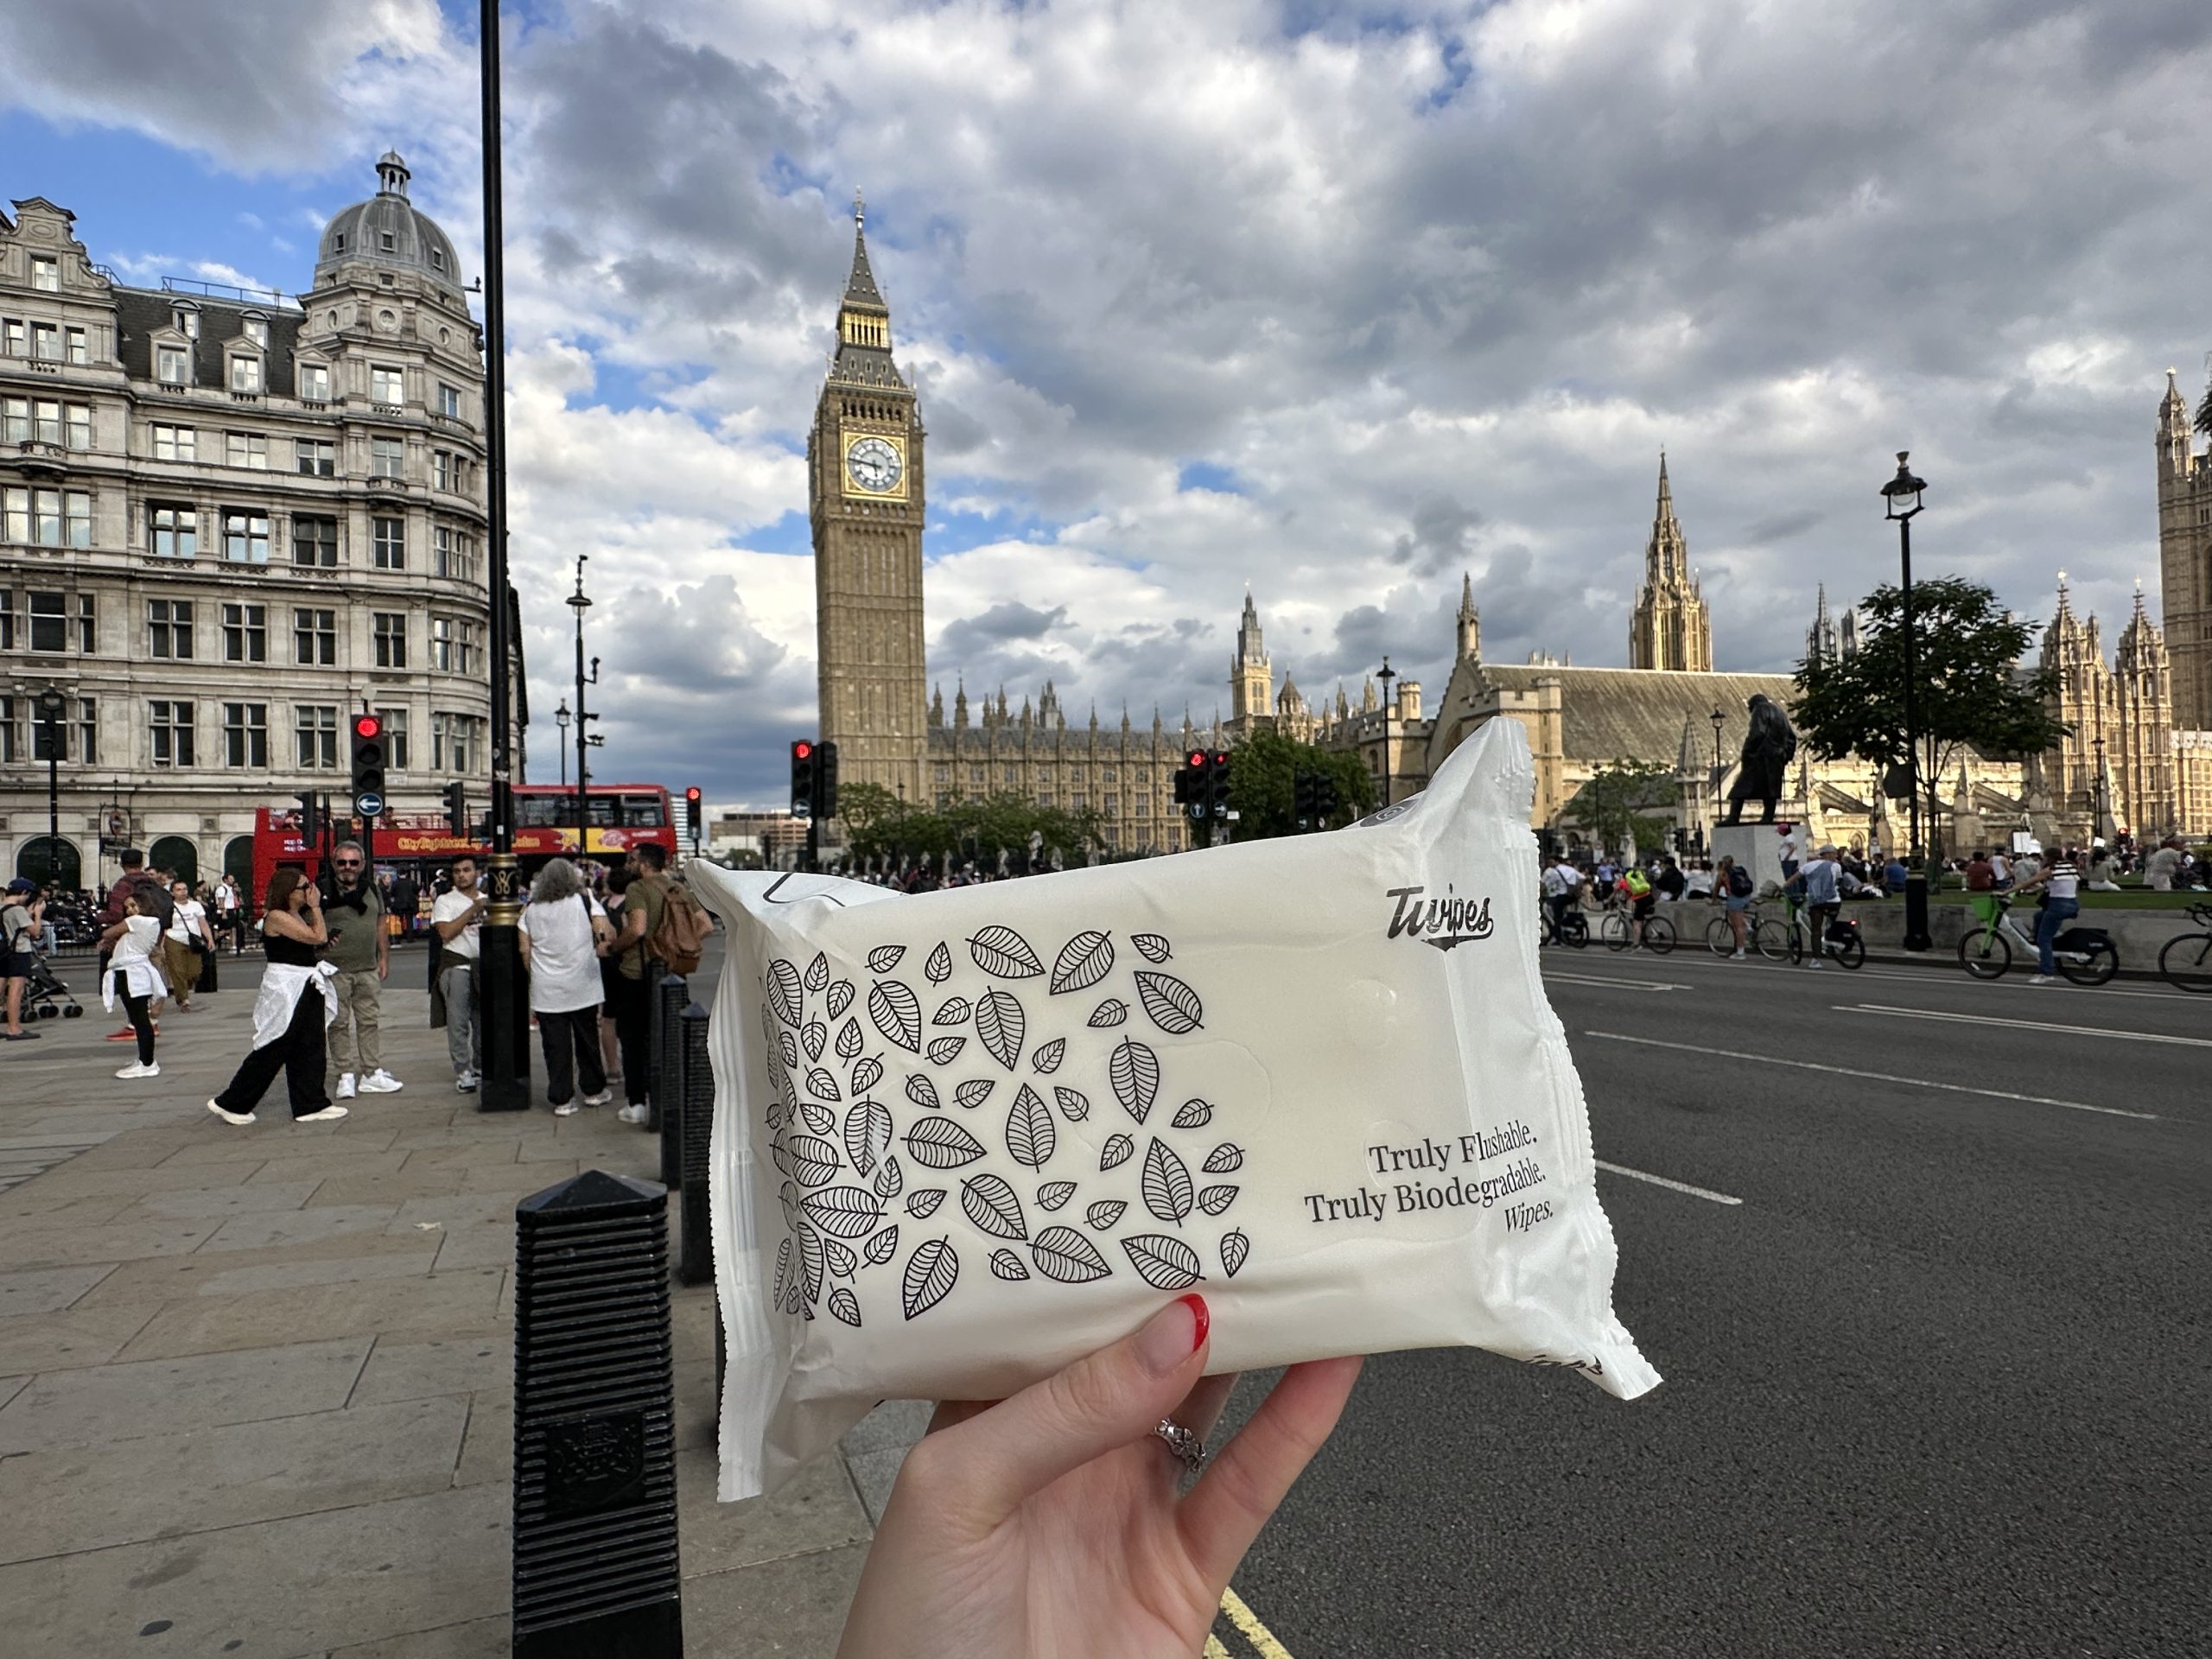 A photo of a pack of Twipes in front of London's Elizabeth Tower (Big Ben)